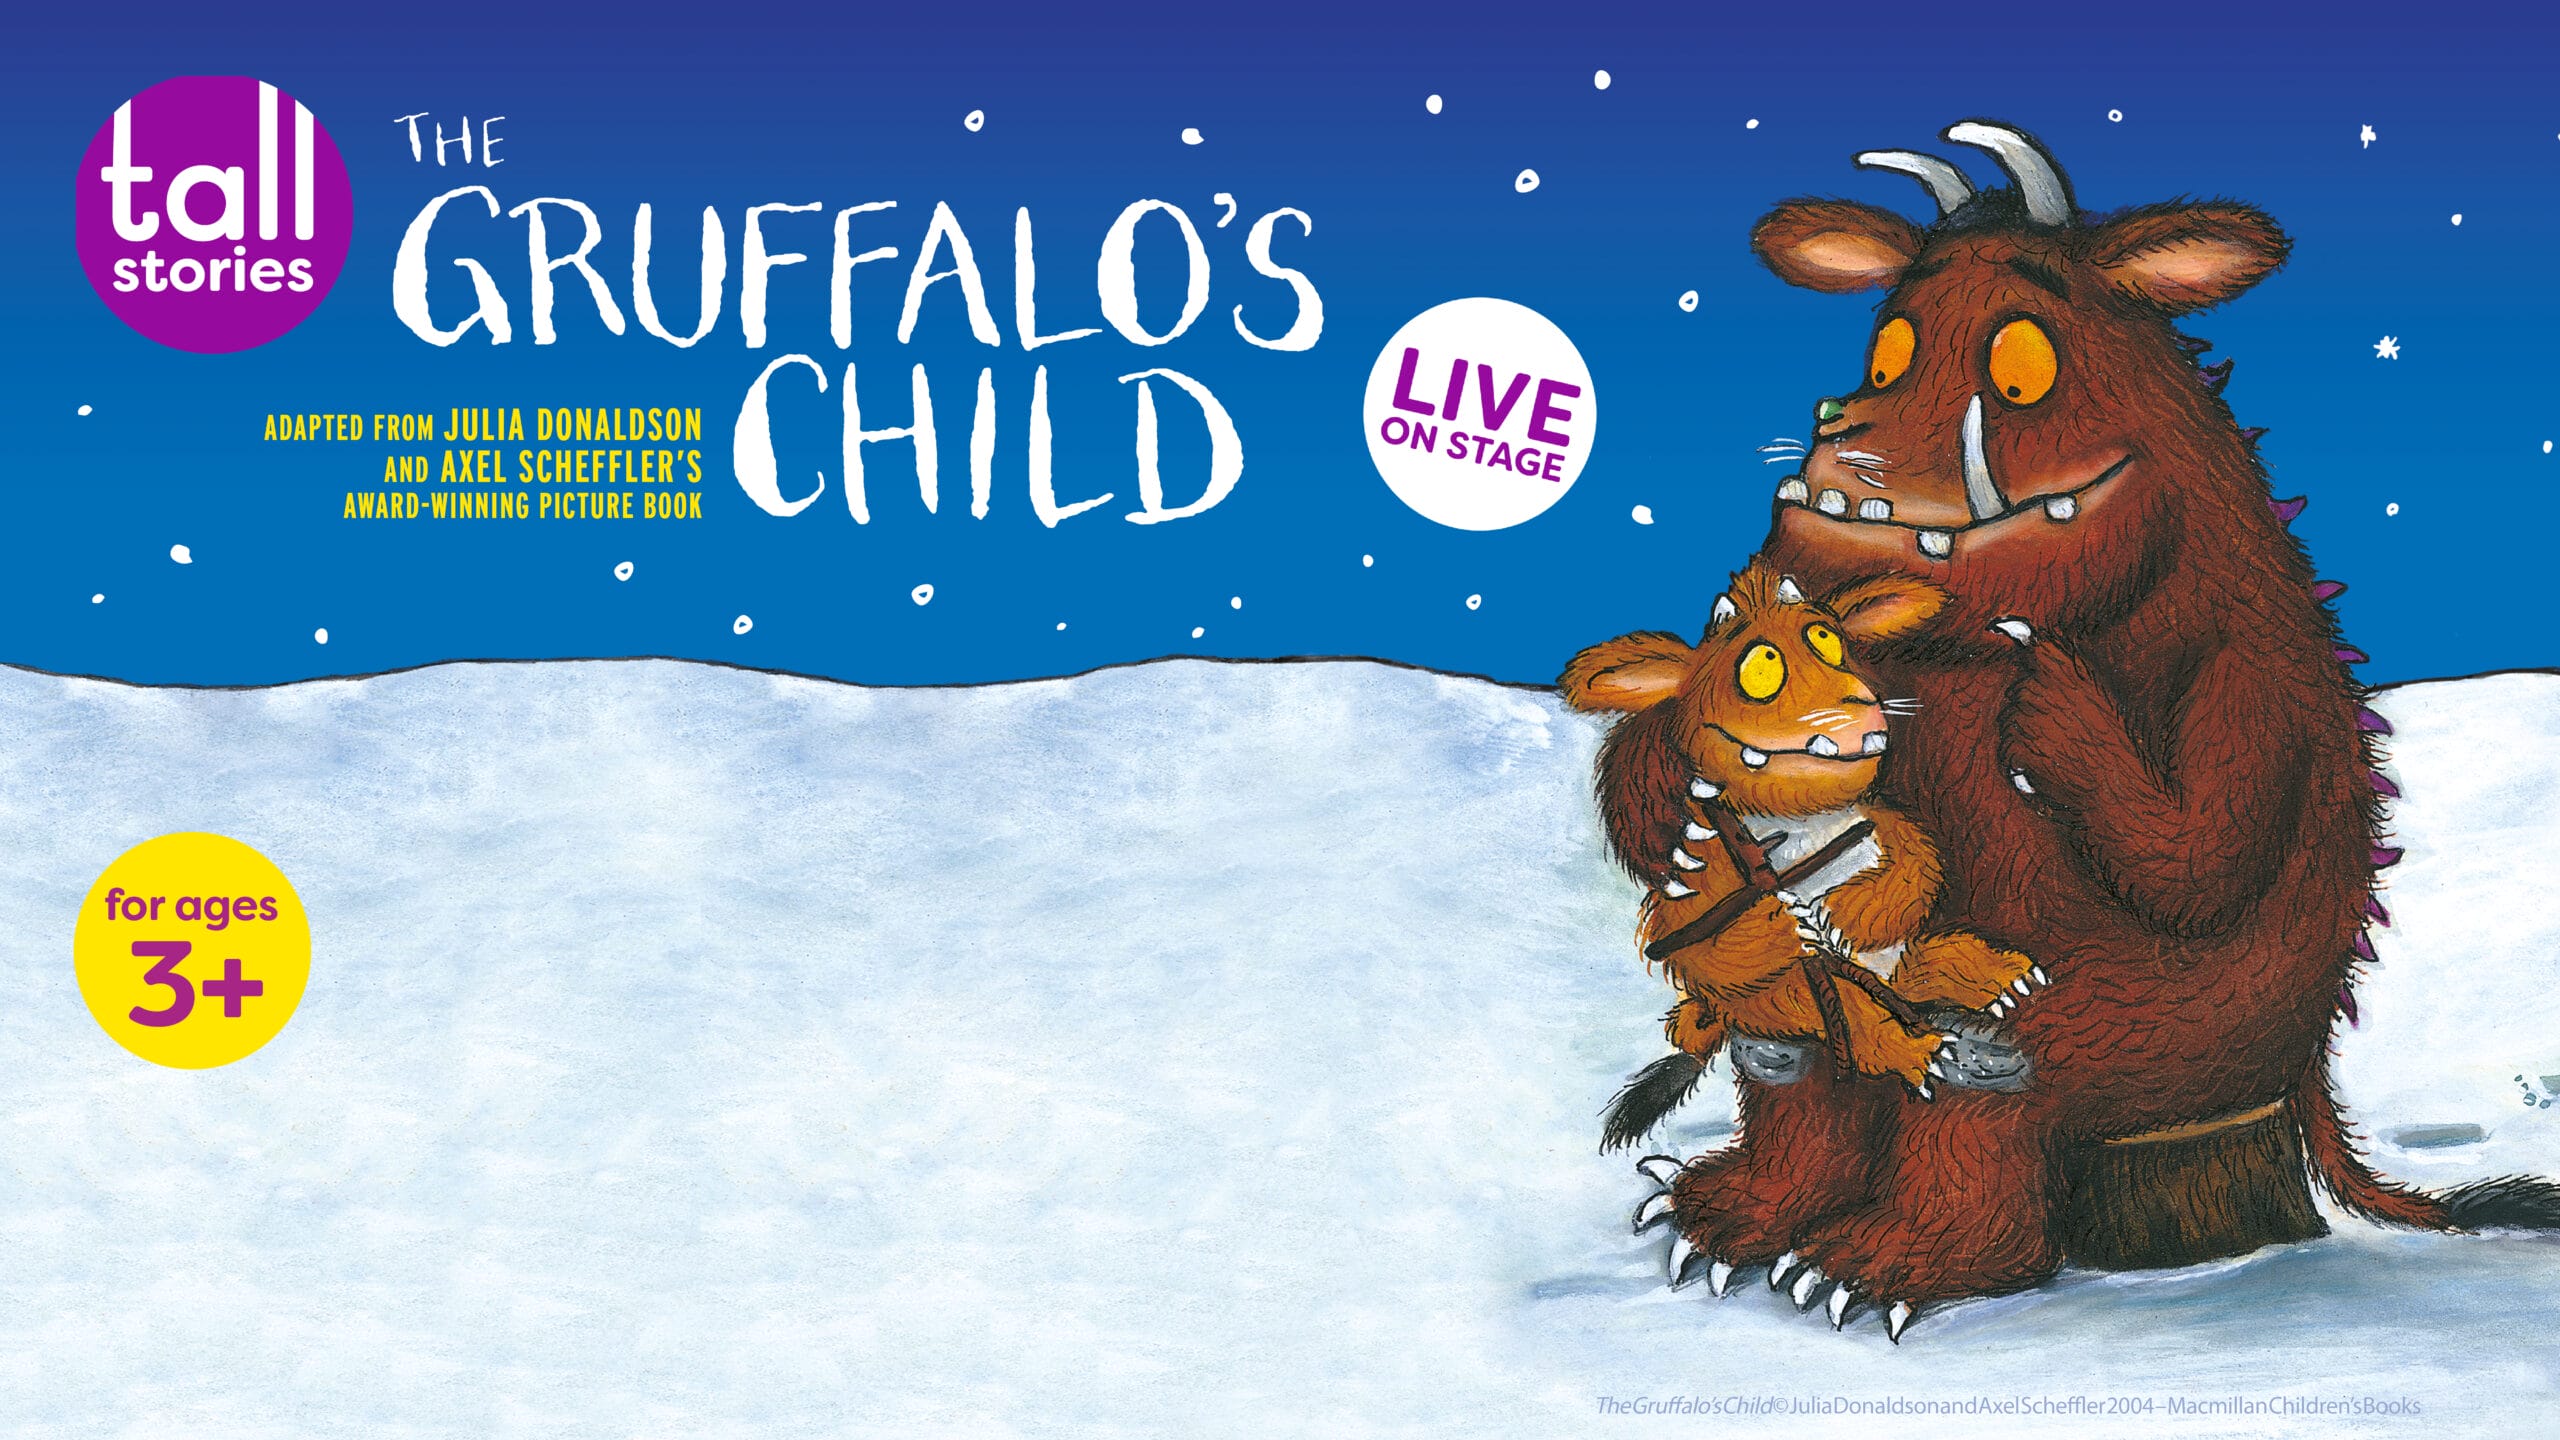 The iconic artwork of The Gruffalo's Child. A snowy nighttime backdrop. In the right hand corner sits the Gruffalo, with their child on their lap. The Gruffalos are large brown furry creatures with big toenails, horns, and happy expressions.